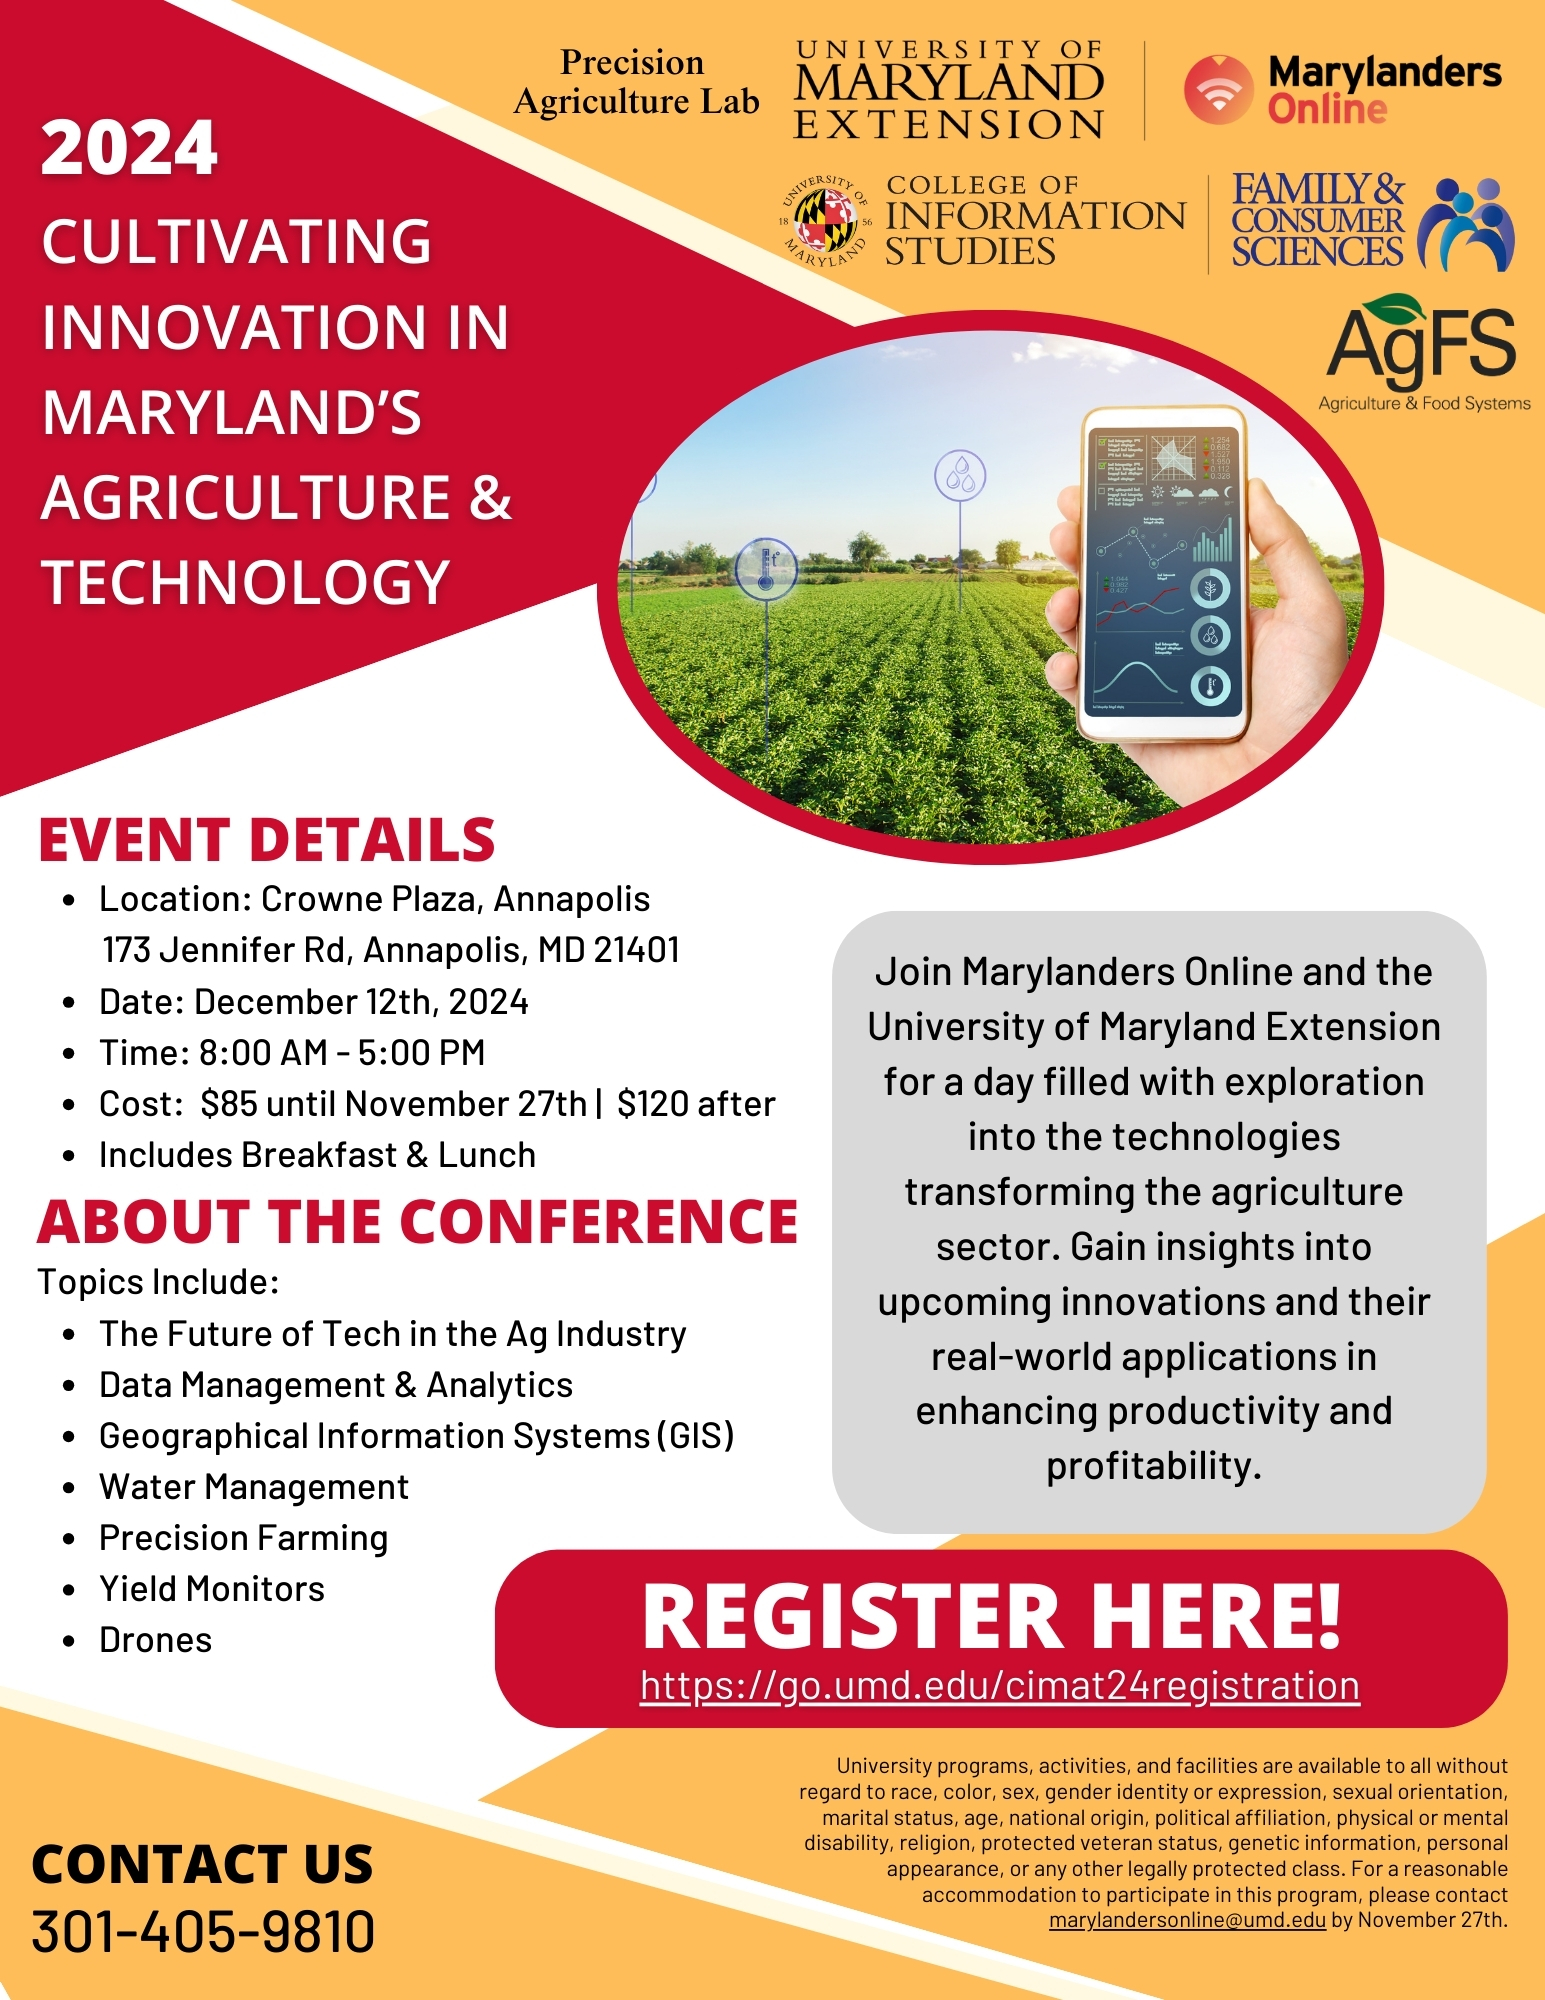 2024 Cultivating Innovation in Maryland’s Agriculture and Technology Conference